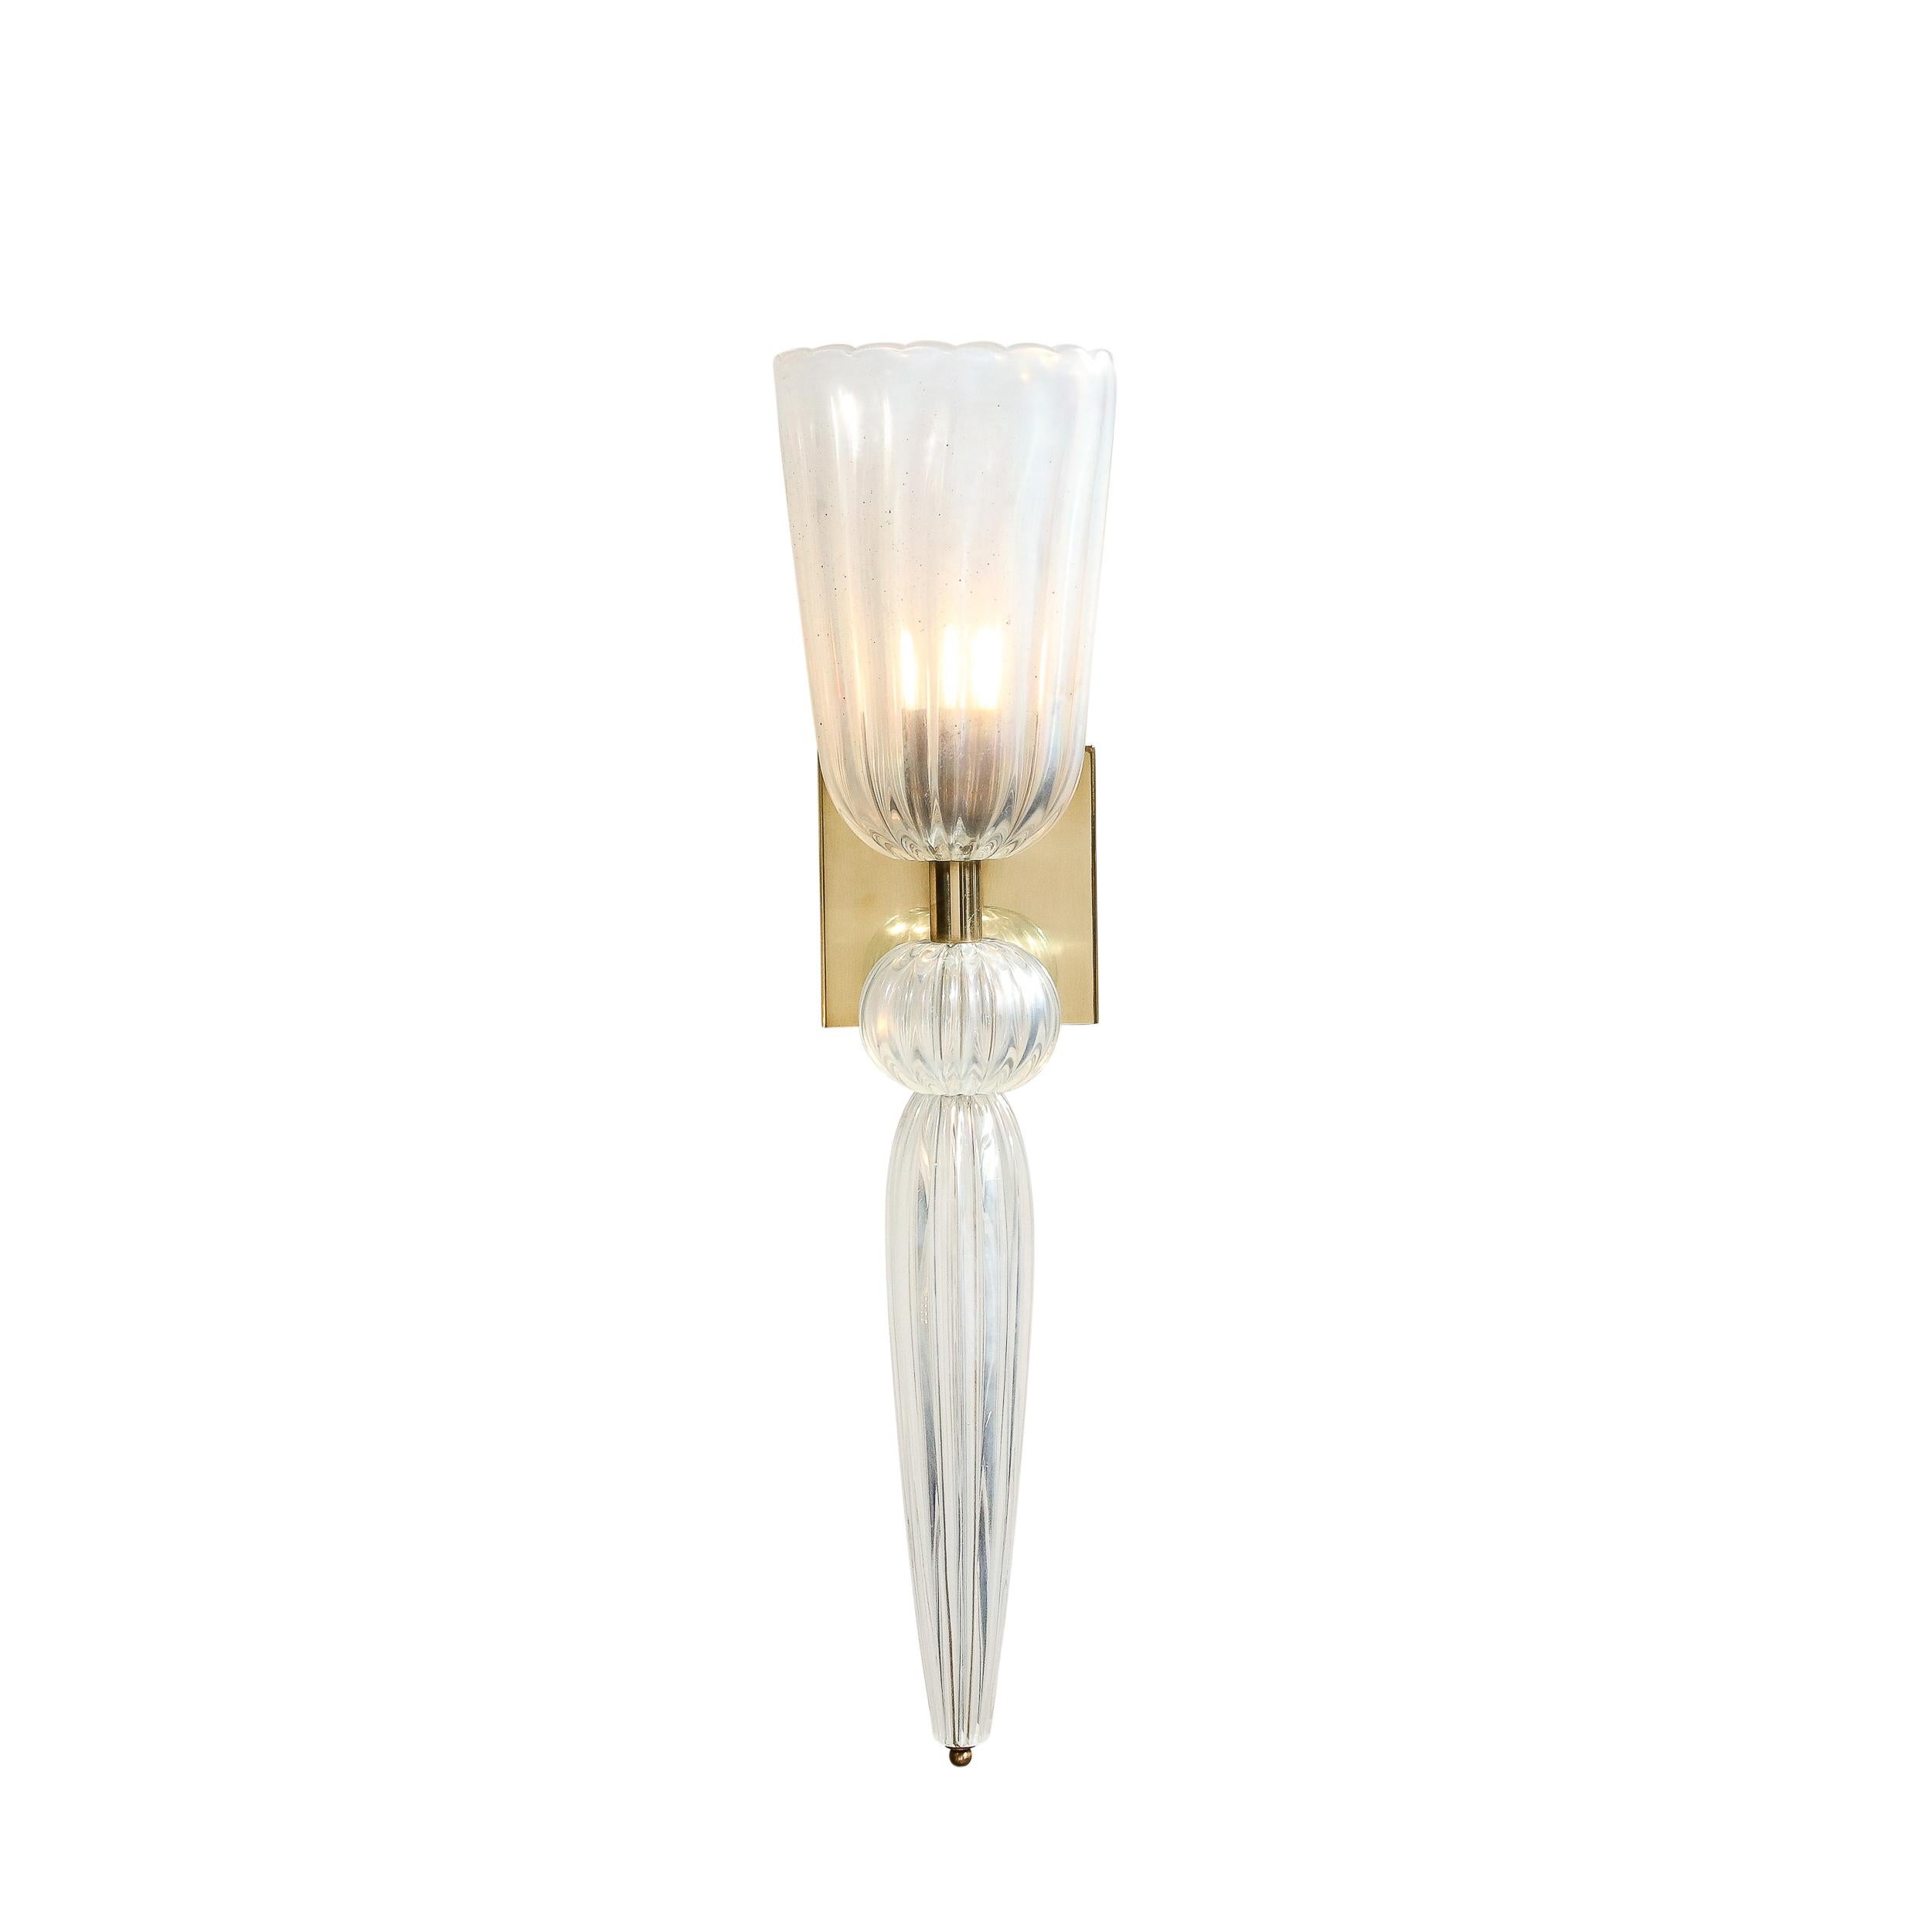 These dramatic and sculptural modernist sconces were hand blown in Murano, Italy- the island off the coast of Venice renowned for centuries for its superlative glass production. They feature elongated conical bodies capped with channeled elliptical